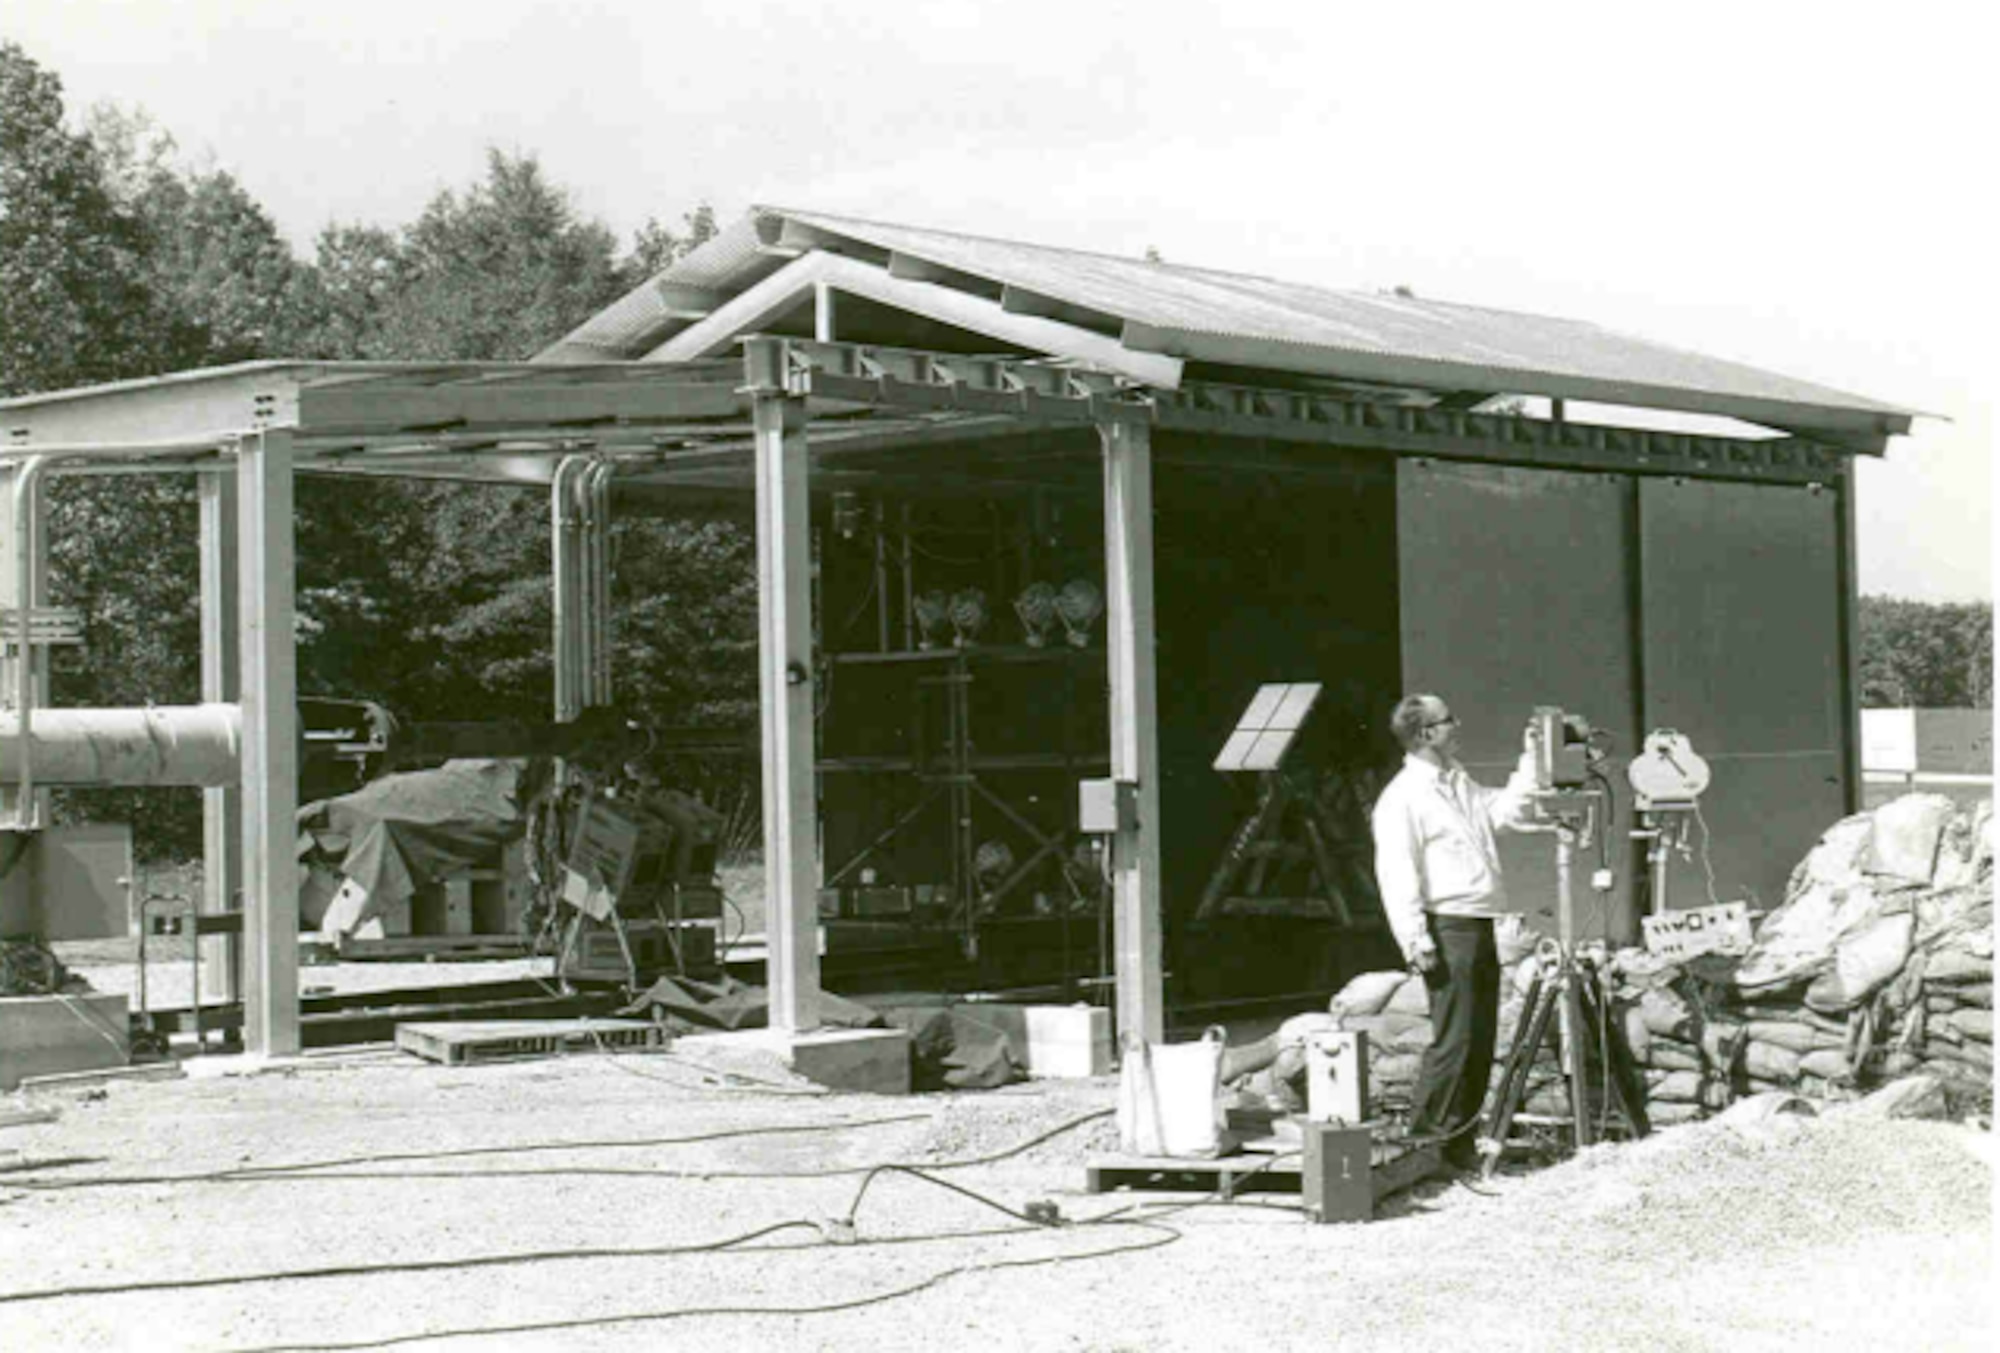 Herb Wiker makes final adjustments to the high-speed motion picture cameras set up at the Bird Impact Range at Arnold Air Force Base, Tennessee, in 1972. These cameras, operating at thousands of frames per second, captured the impacts of bird strikes simulated at the facility, more famously known as the “Chicken Gun.” Strikes were simulated by launching chicken carcasses at test articles, and the muzzle of the launcher can be seen beneath the steel structure on the left. The first shot from the Chicken Gun was fired 50 years ago. (U.S. Air Force photo)